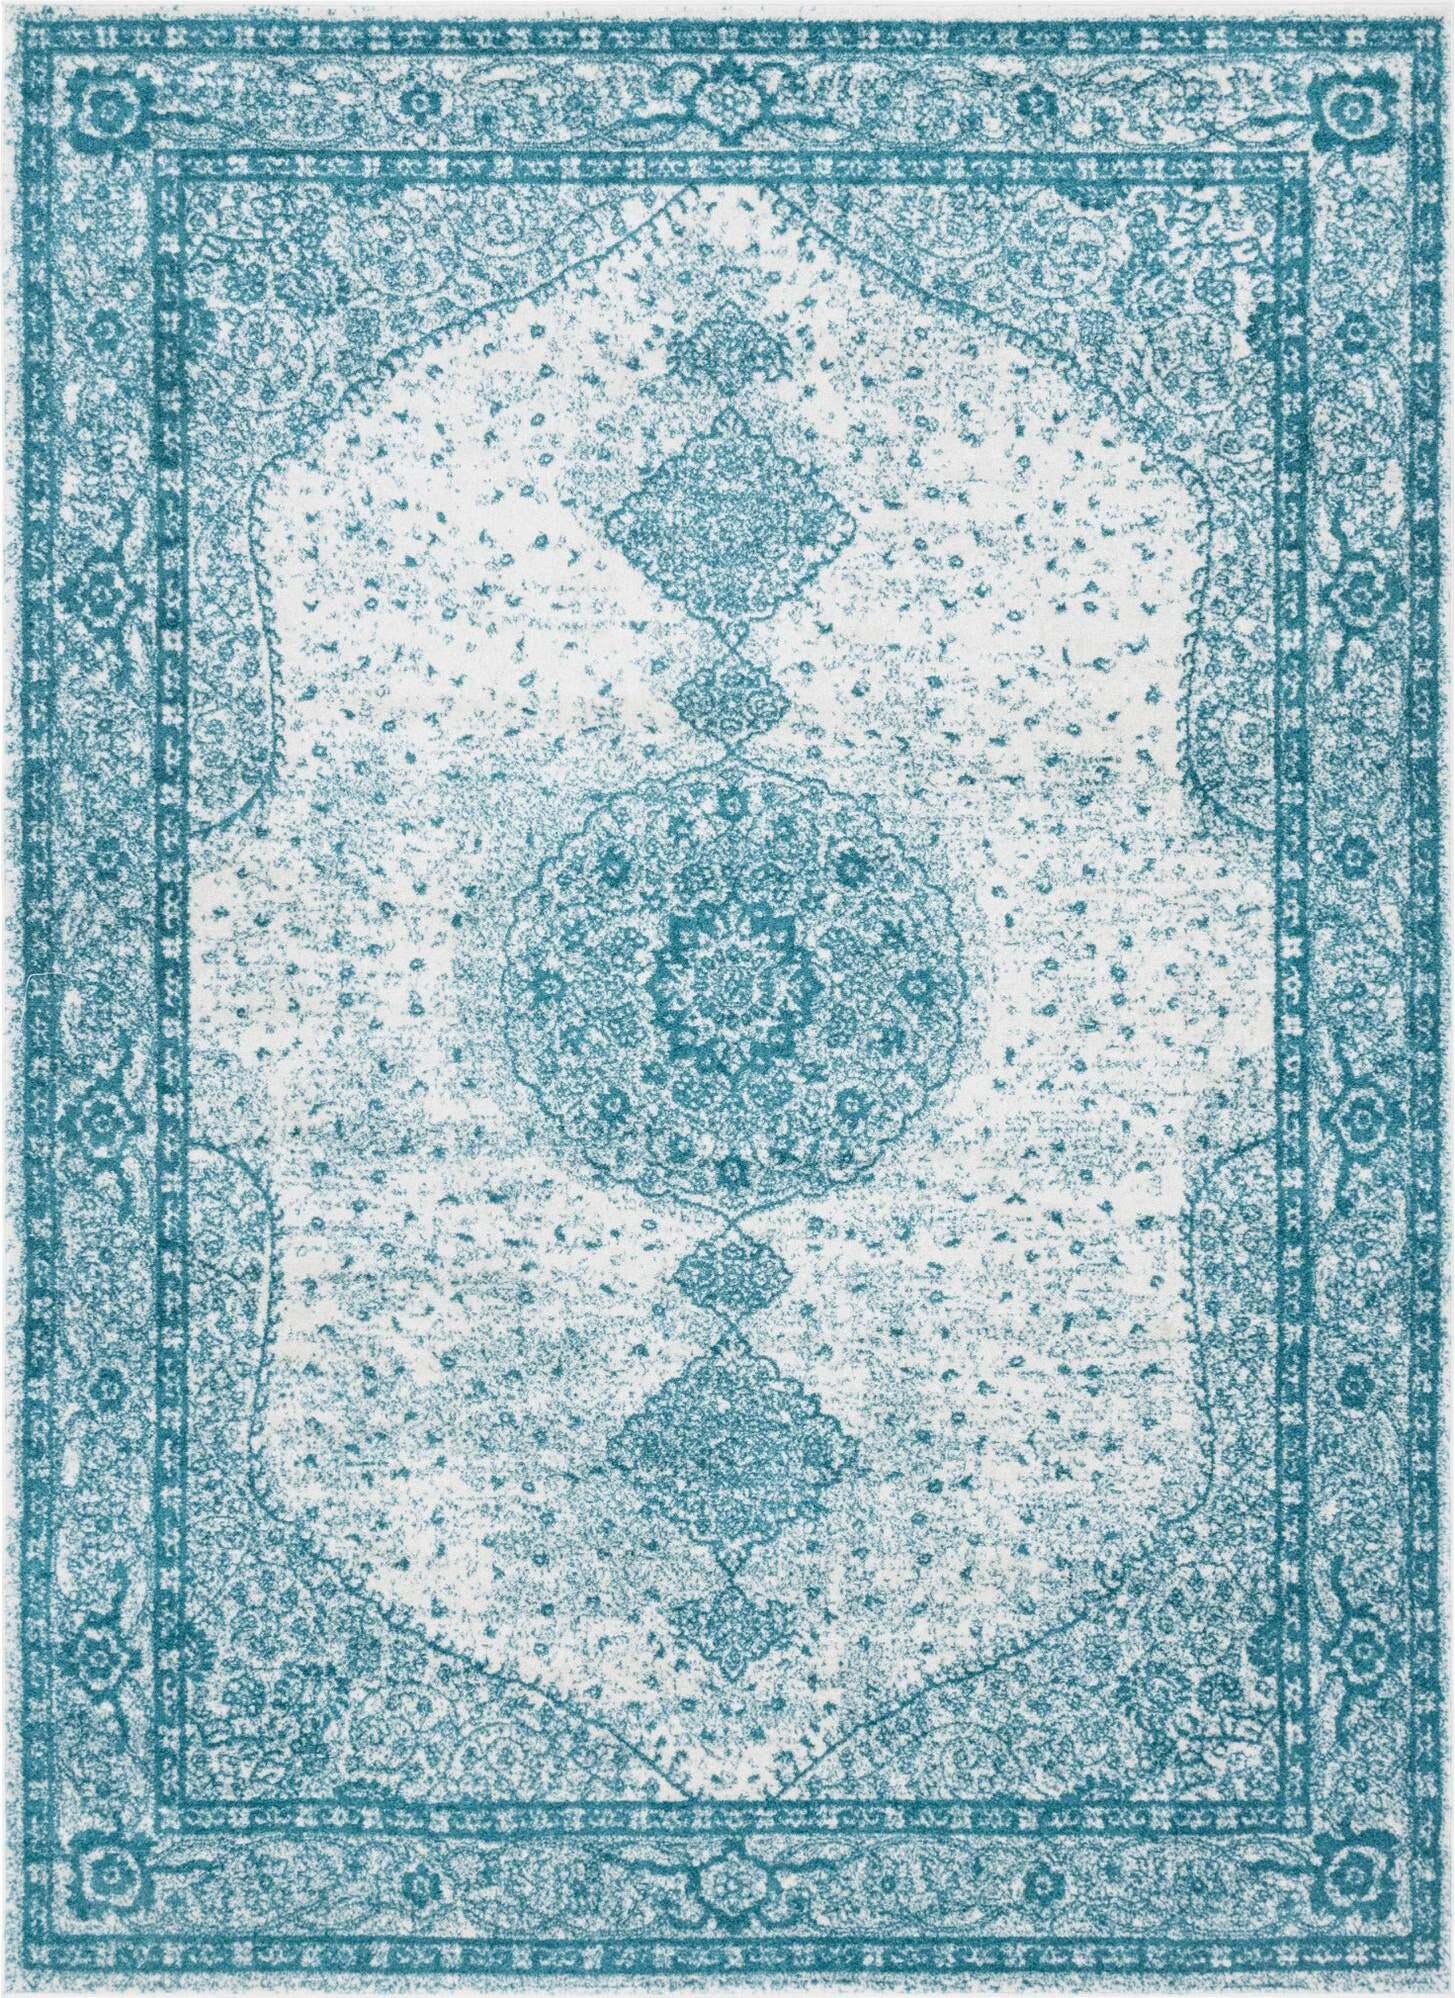 Unique Loom Indoor Rugs - Bromley Medallion Rectangular 8x11 Rug Turquoise & Ivory